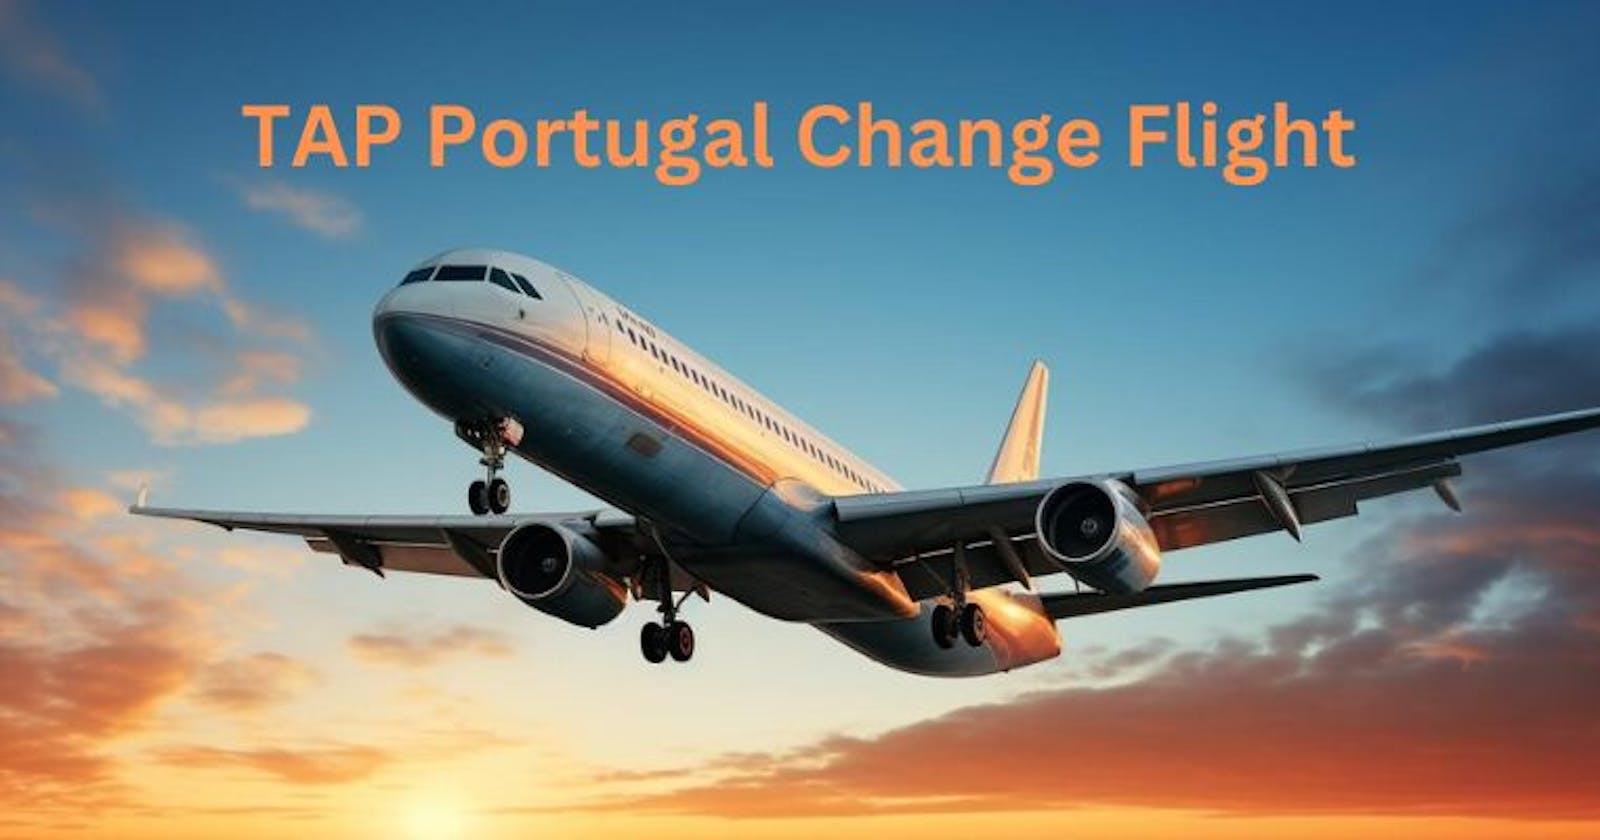 How to Change TAP Portugal Airlines Flight?